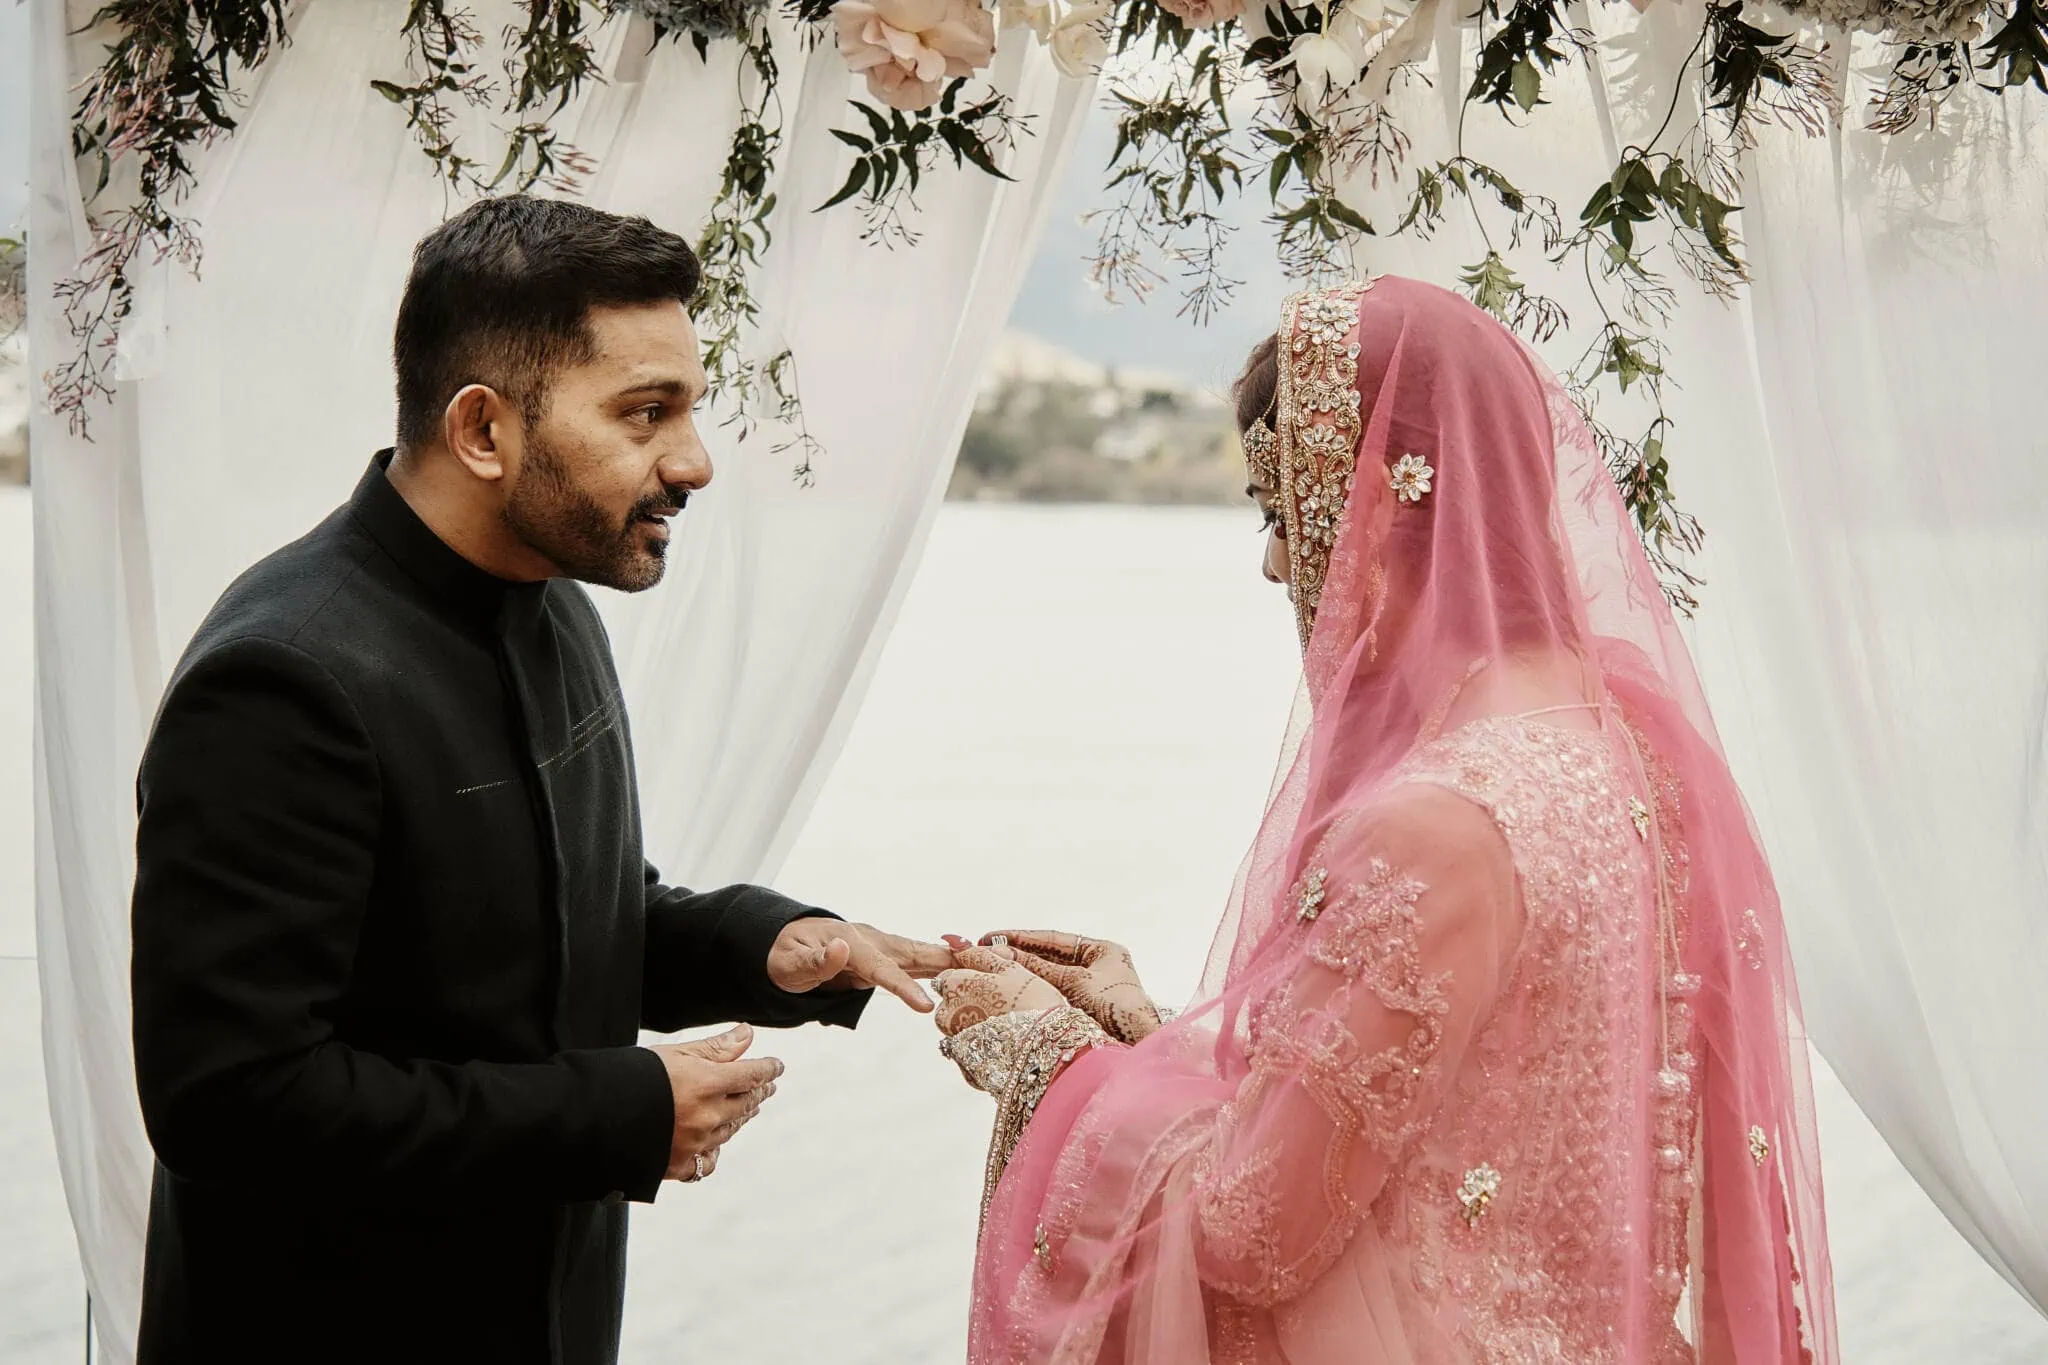 Queenstown New Zealand Elopement Wedding Photographer - Wasim and Yumn exchange rings at a lakeside Islamic wedding in Queenstown.